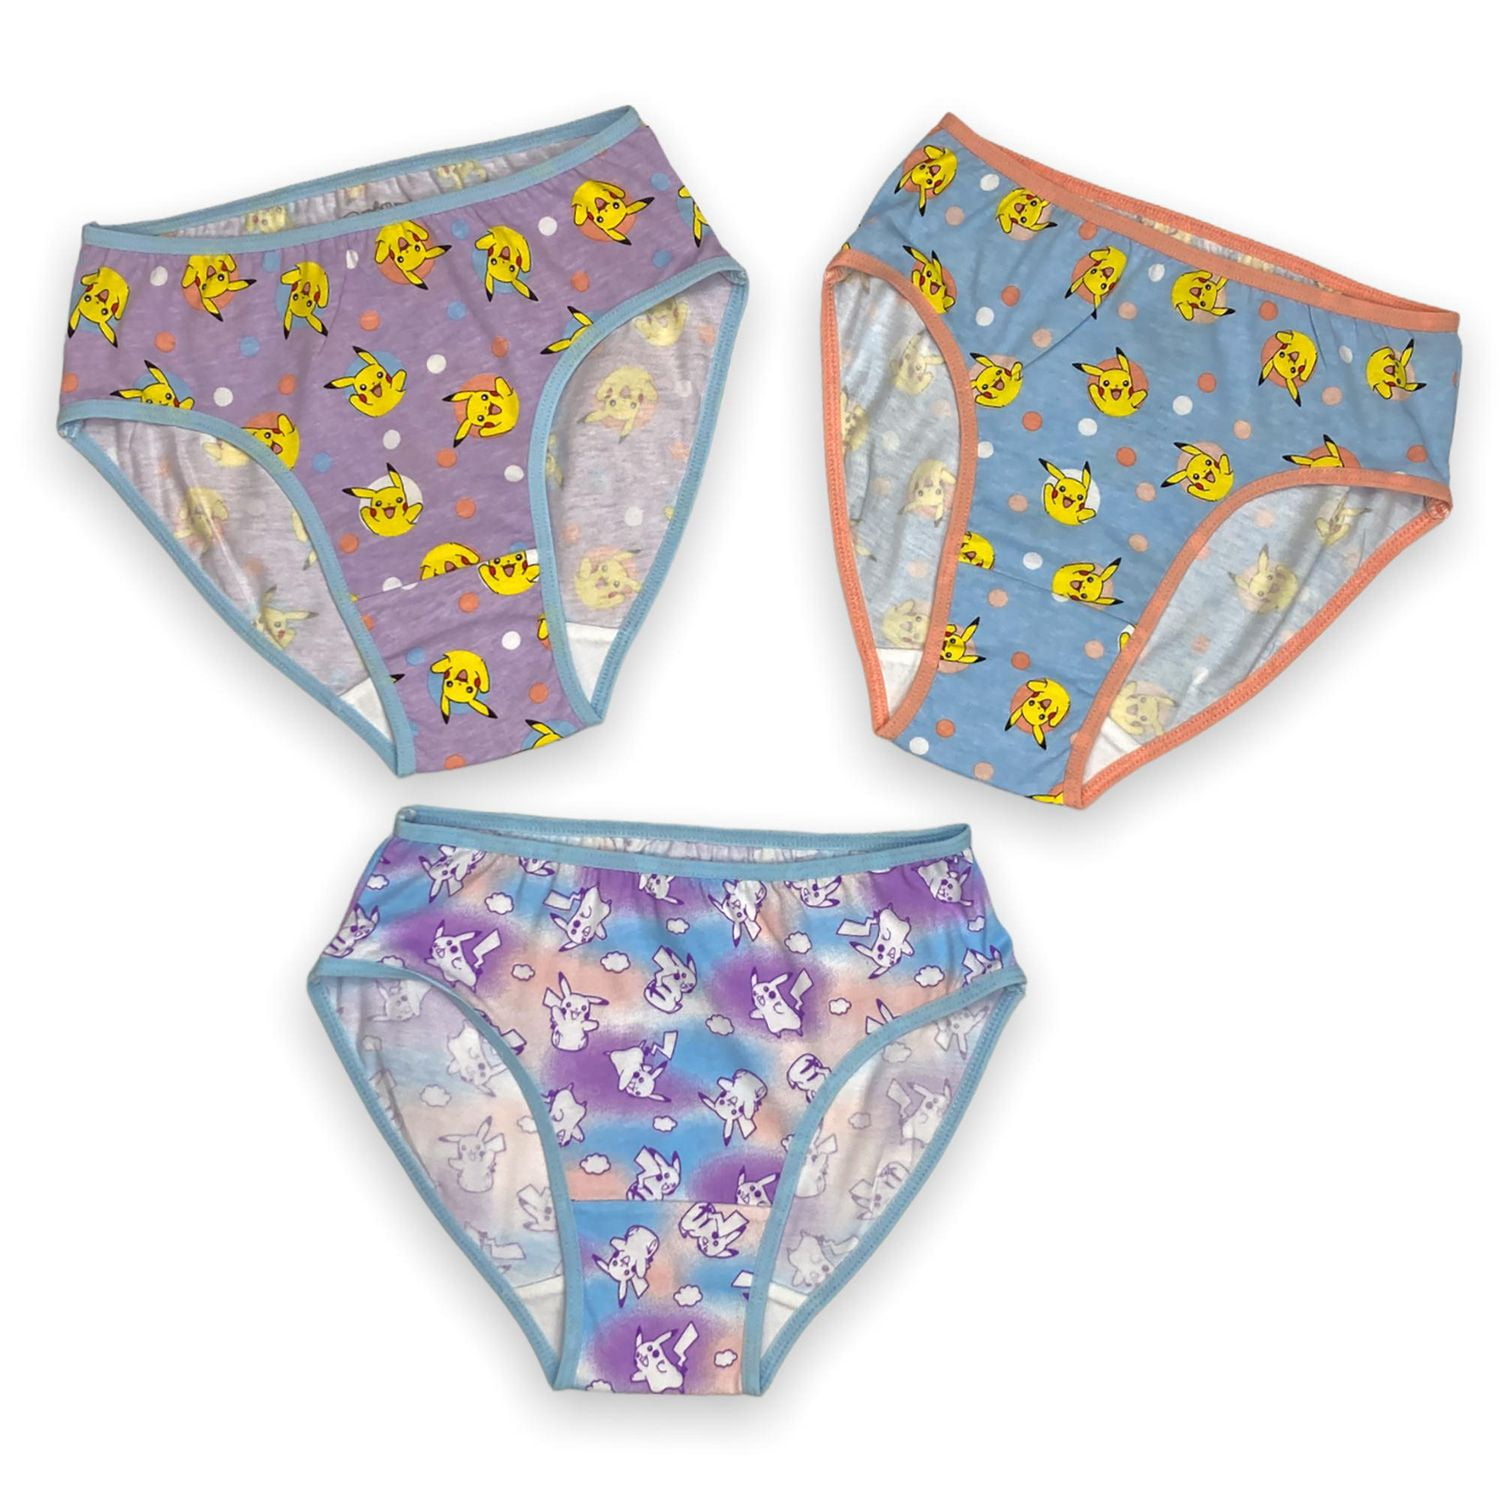 Carters Girls 4-6X 7-Pack Days of the Week Panty (Multi 4/5T